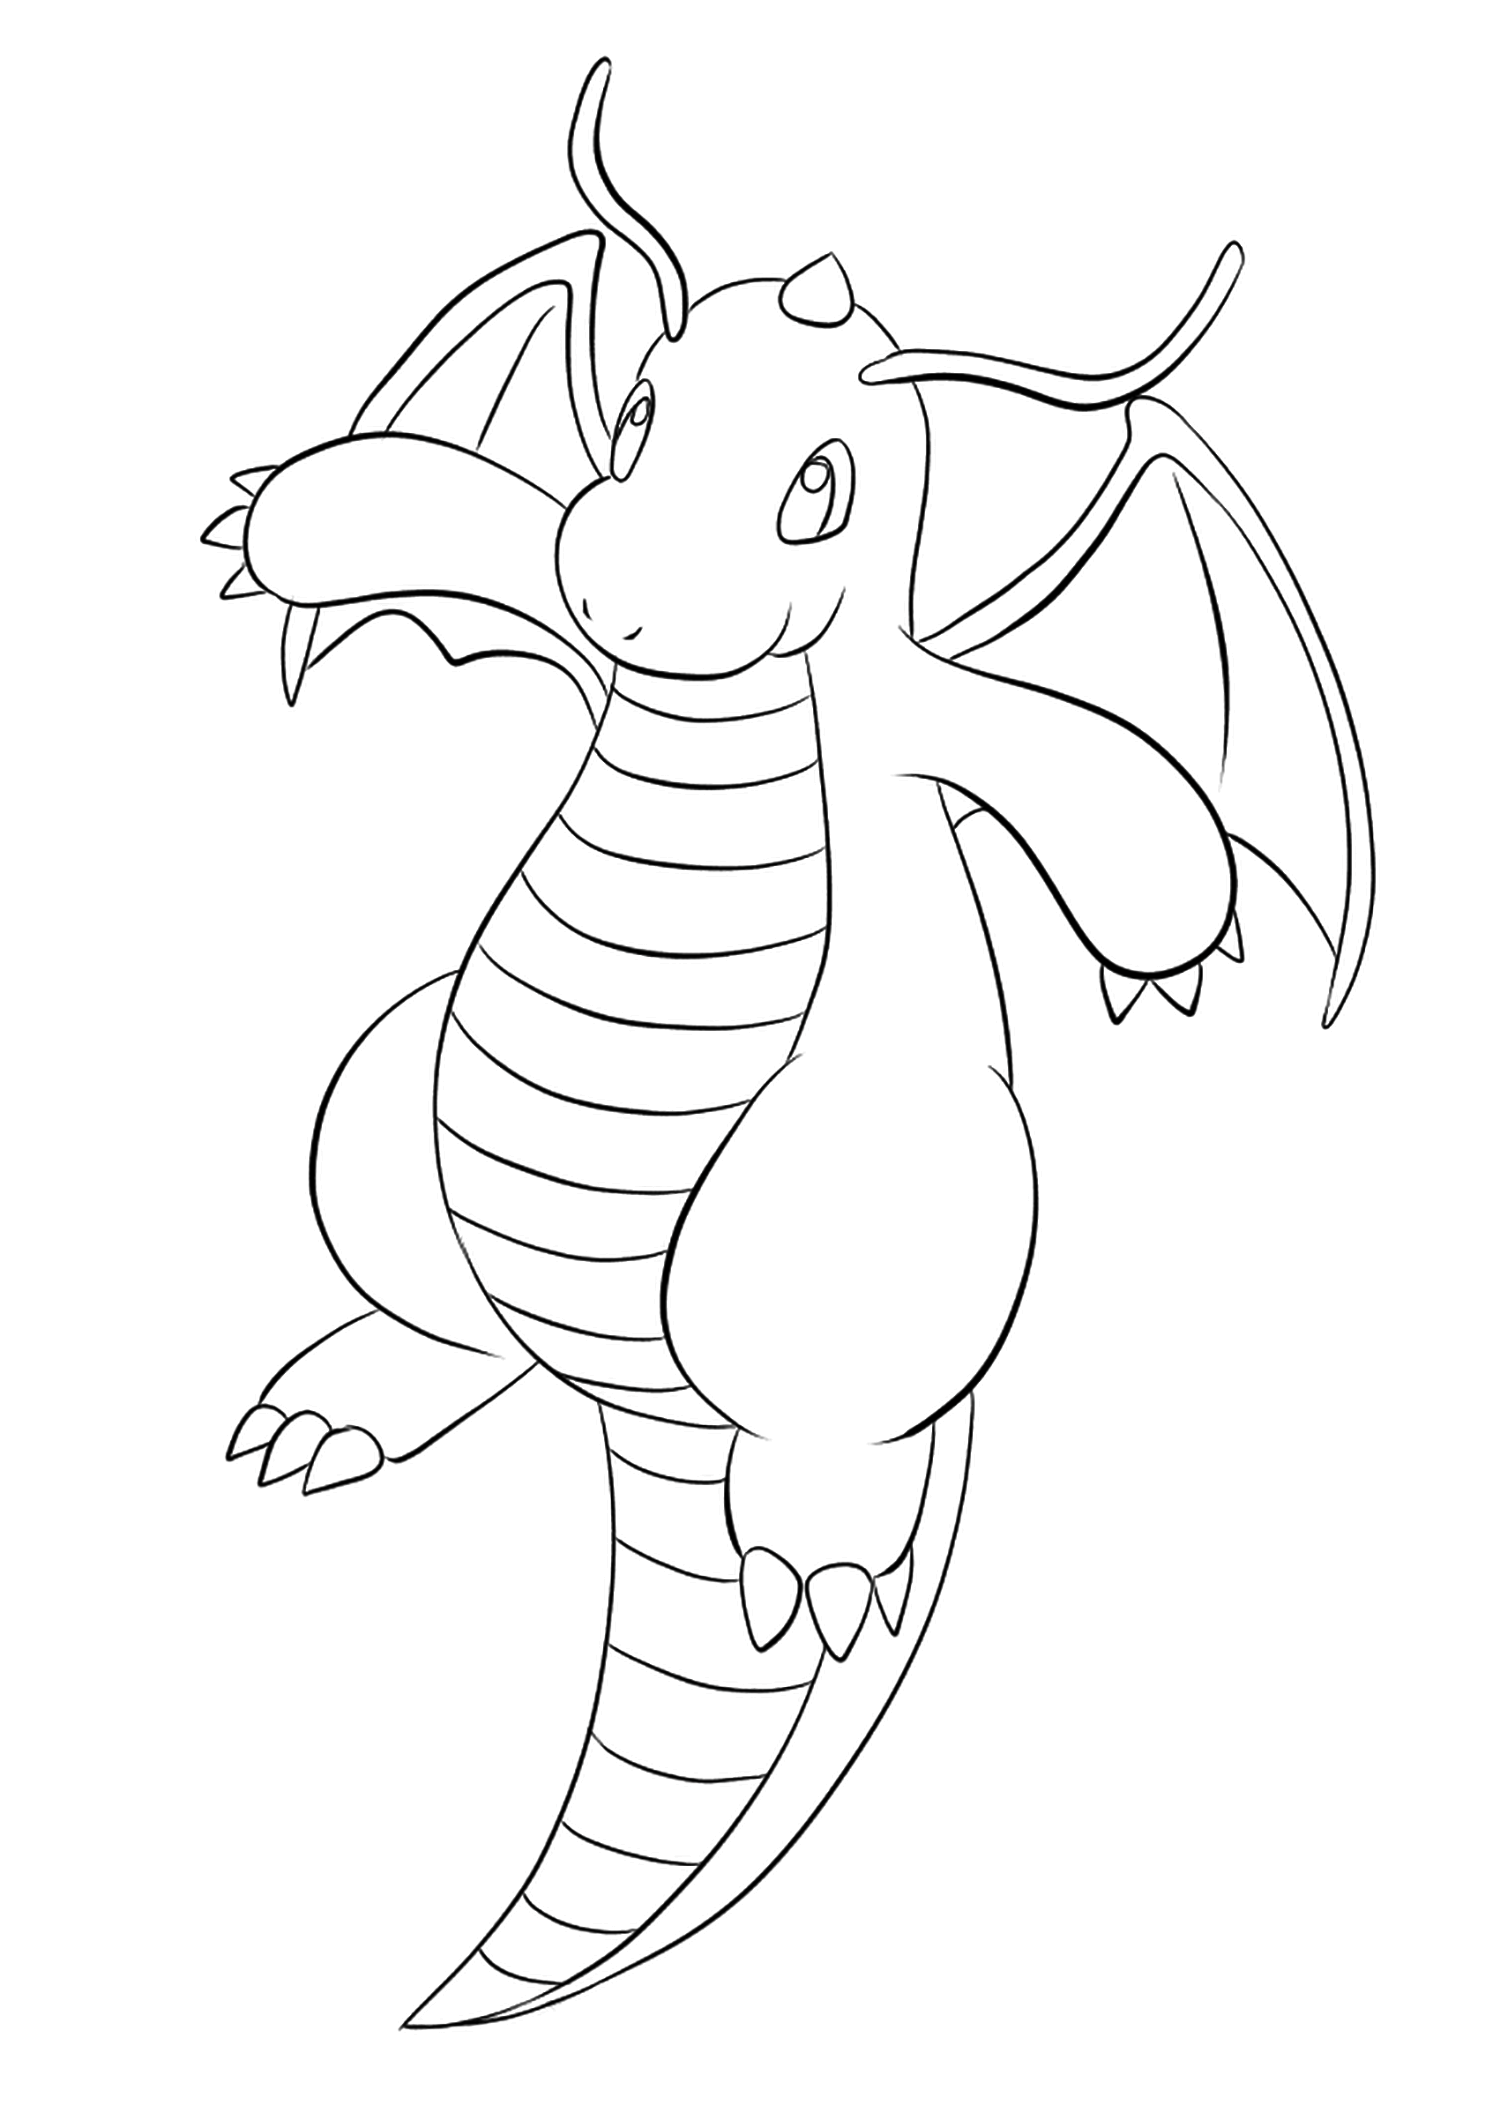 Dragonite (No.149). Dragonite Coloring page, Generation I Pokemon of type Dragon and FlyingOriginal image credit: Pokemon linearts by Lilly Gerbil on Deviantart.Permission:  All rights reserved © Pokemon company and Ken Sugimori.